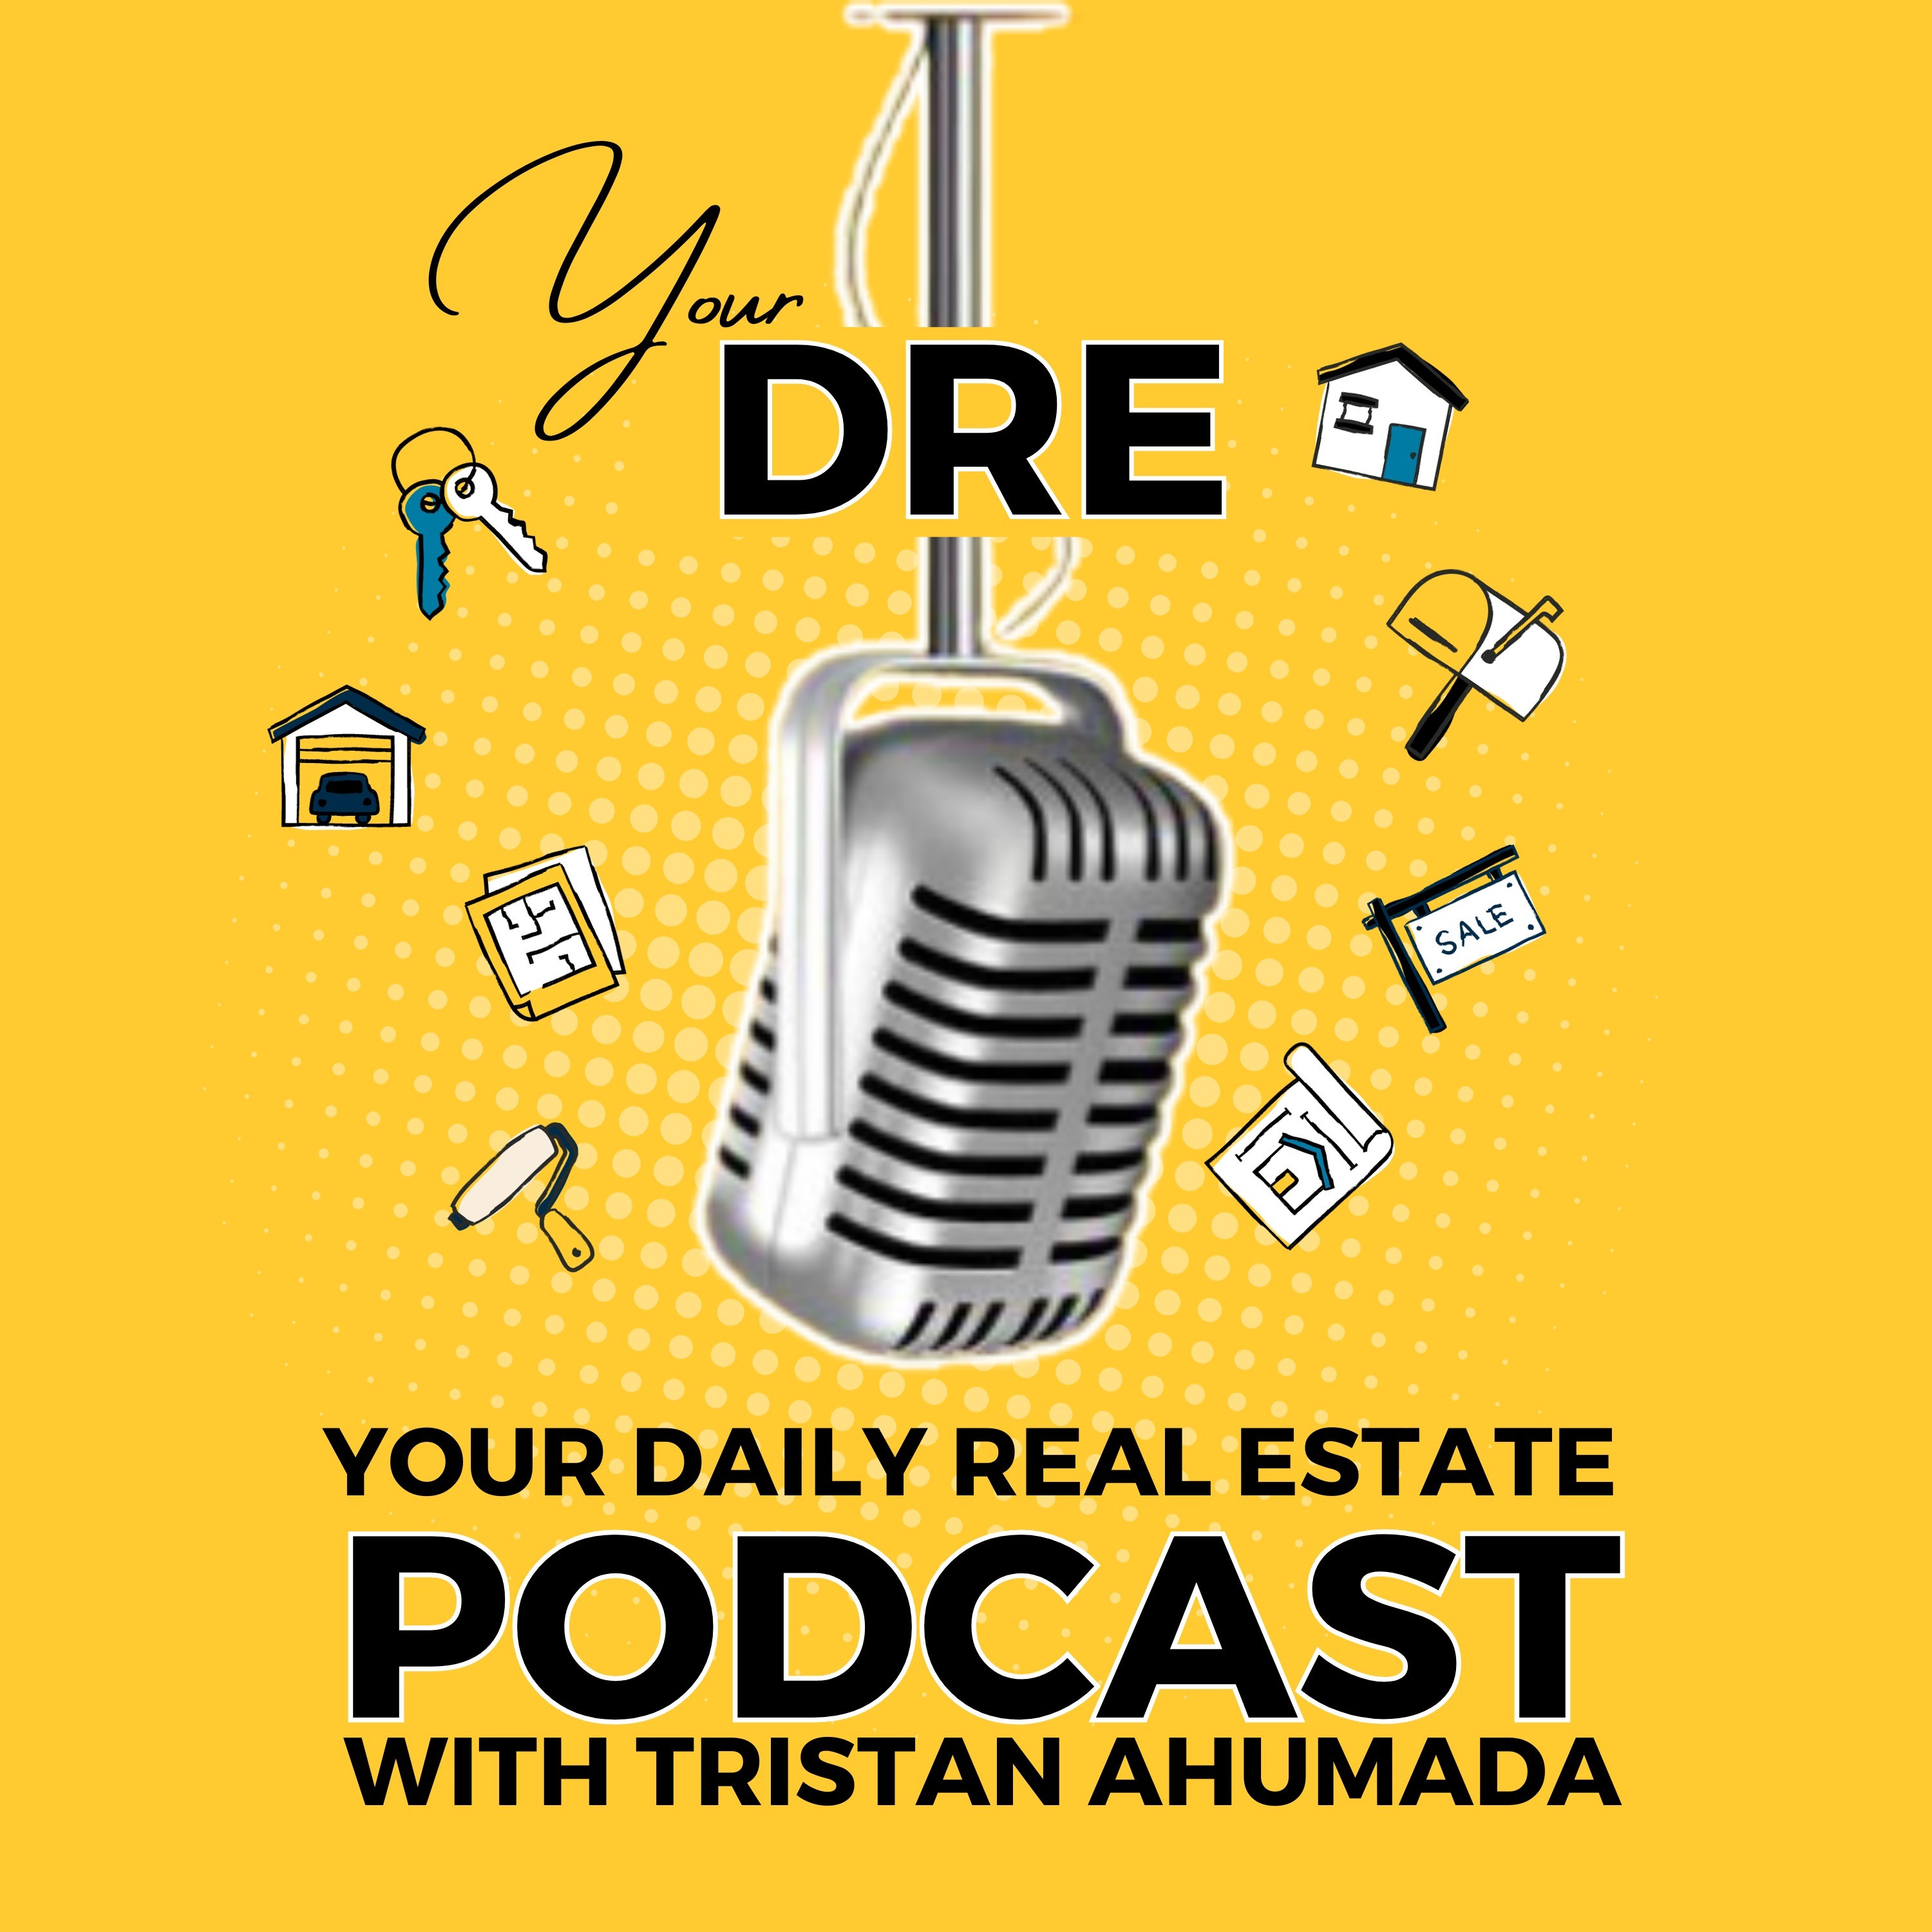 Your Daily Real Estate Podcast with Tristan Ahumada